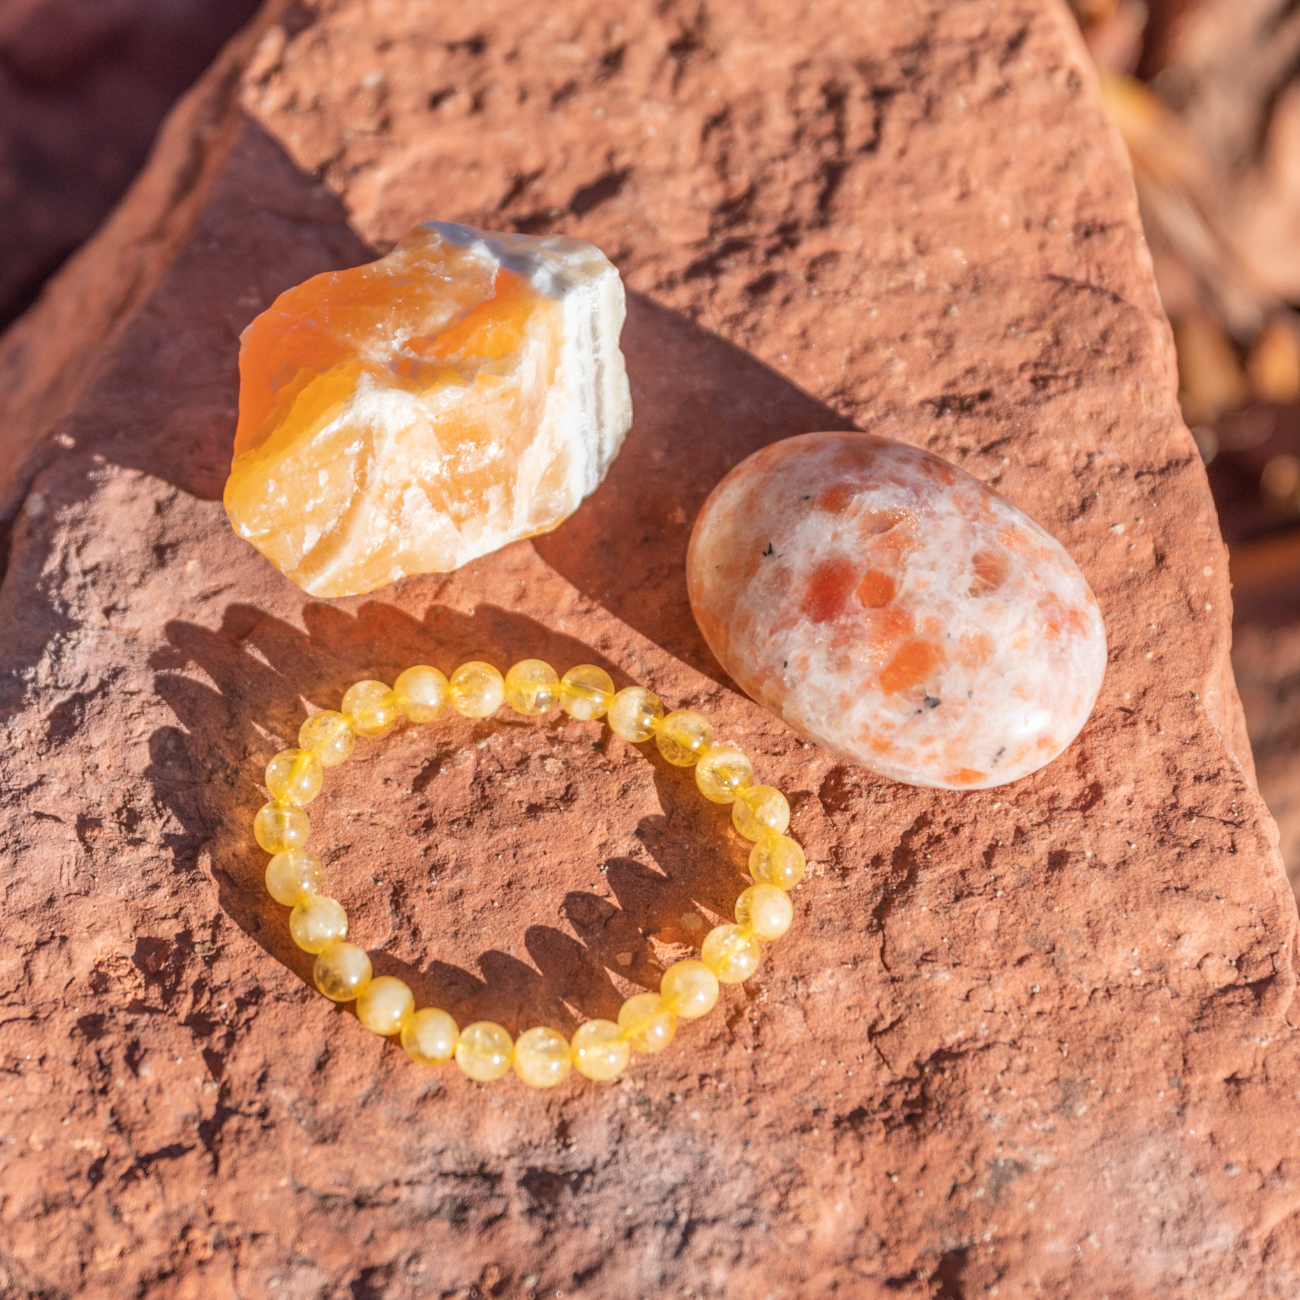 healing crystals: a bundle of crystals used to help create happiness in sedona, arizona